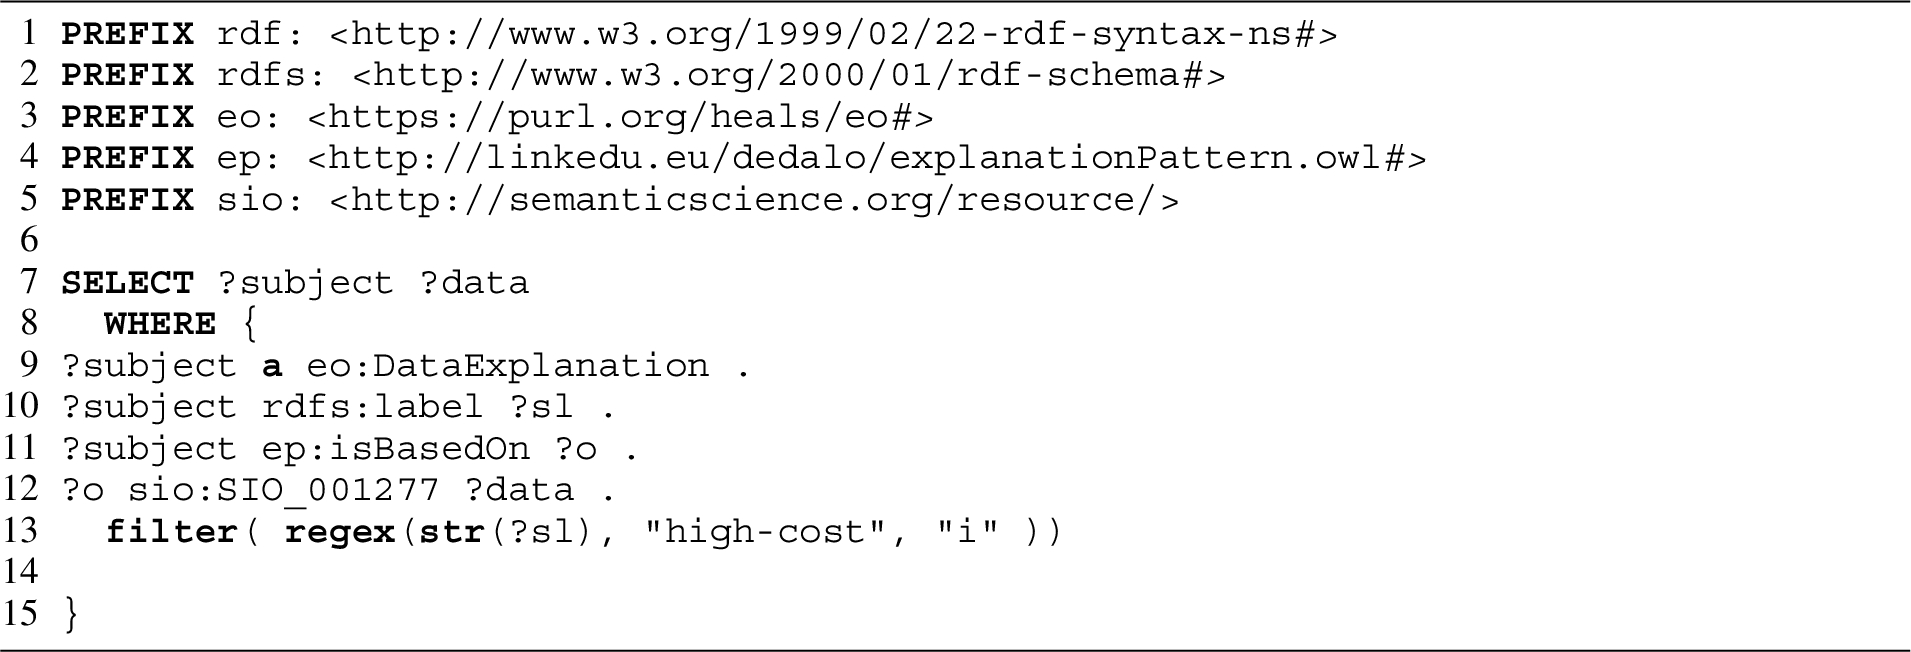 A SPARQL query run on the medical expenditure knowledge graph, that retrieves the rules associated with a data explanation for high-cost expenditure to answer a competency question of the kind, “What are the rules for high-cost expenditure?